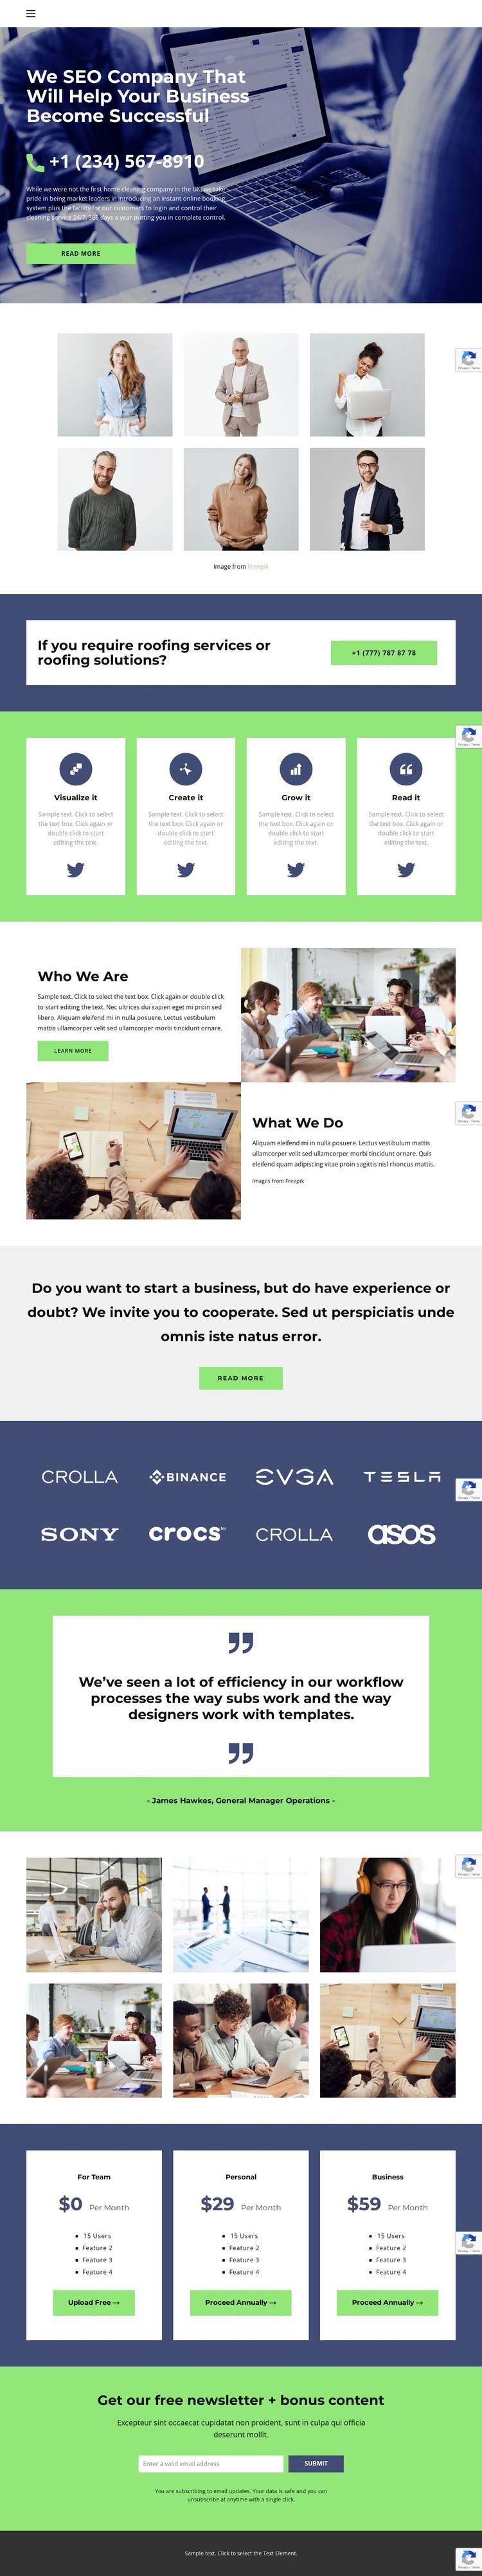 Business in crisis Homepage Design